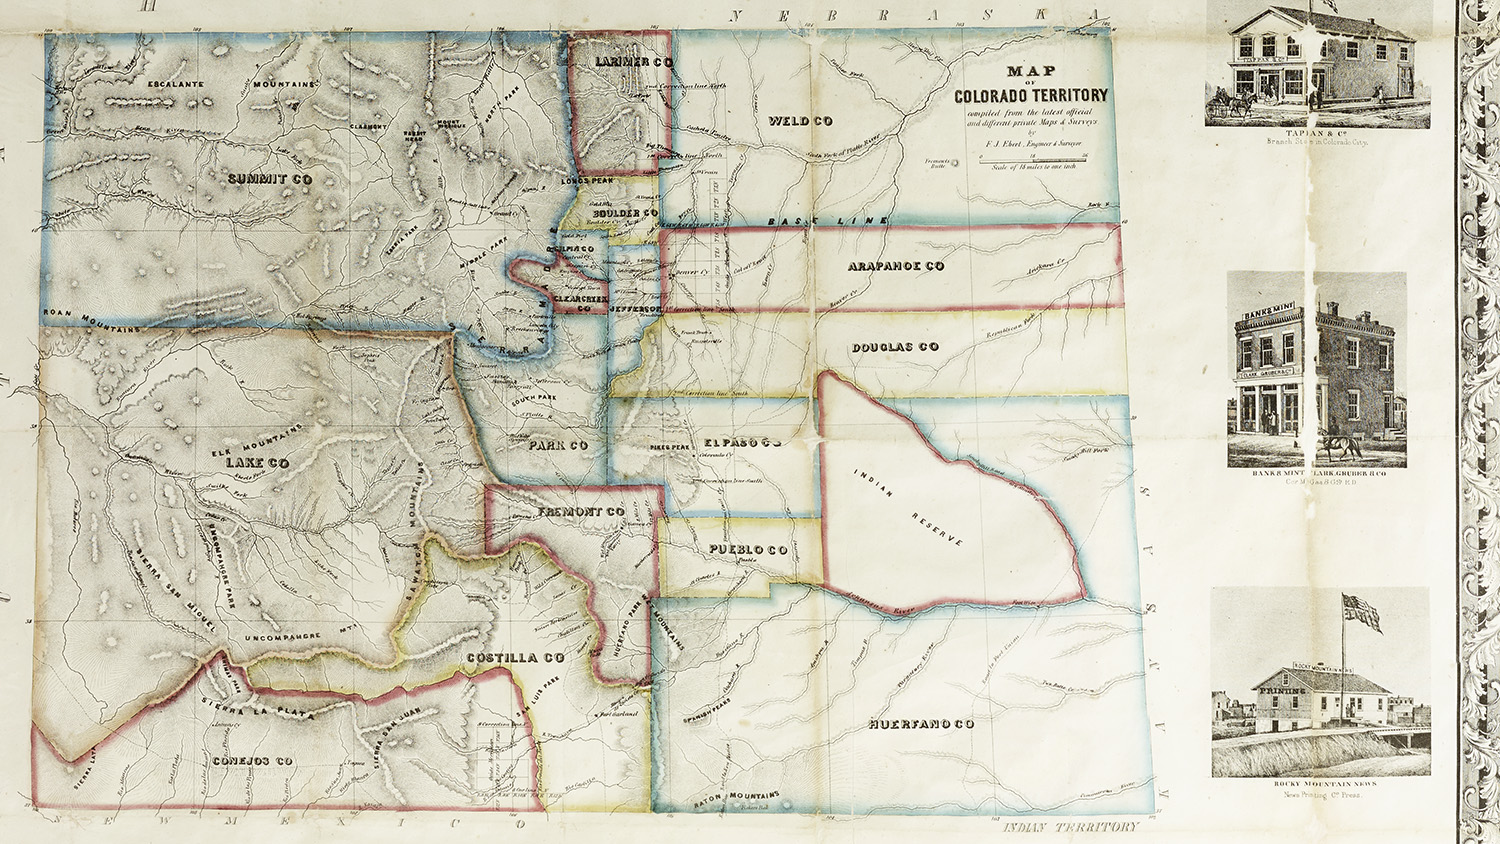 Map of the Colorado Territory from 1862, soon after the theft of Native American land along the front range of the Rocky Mountains